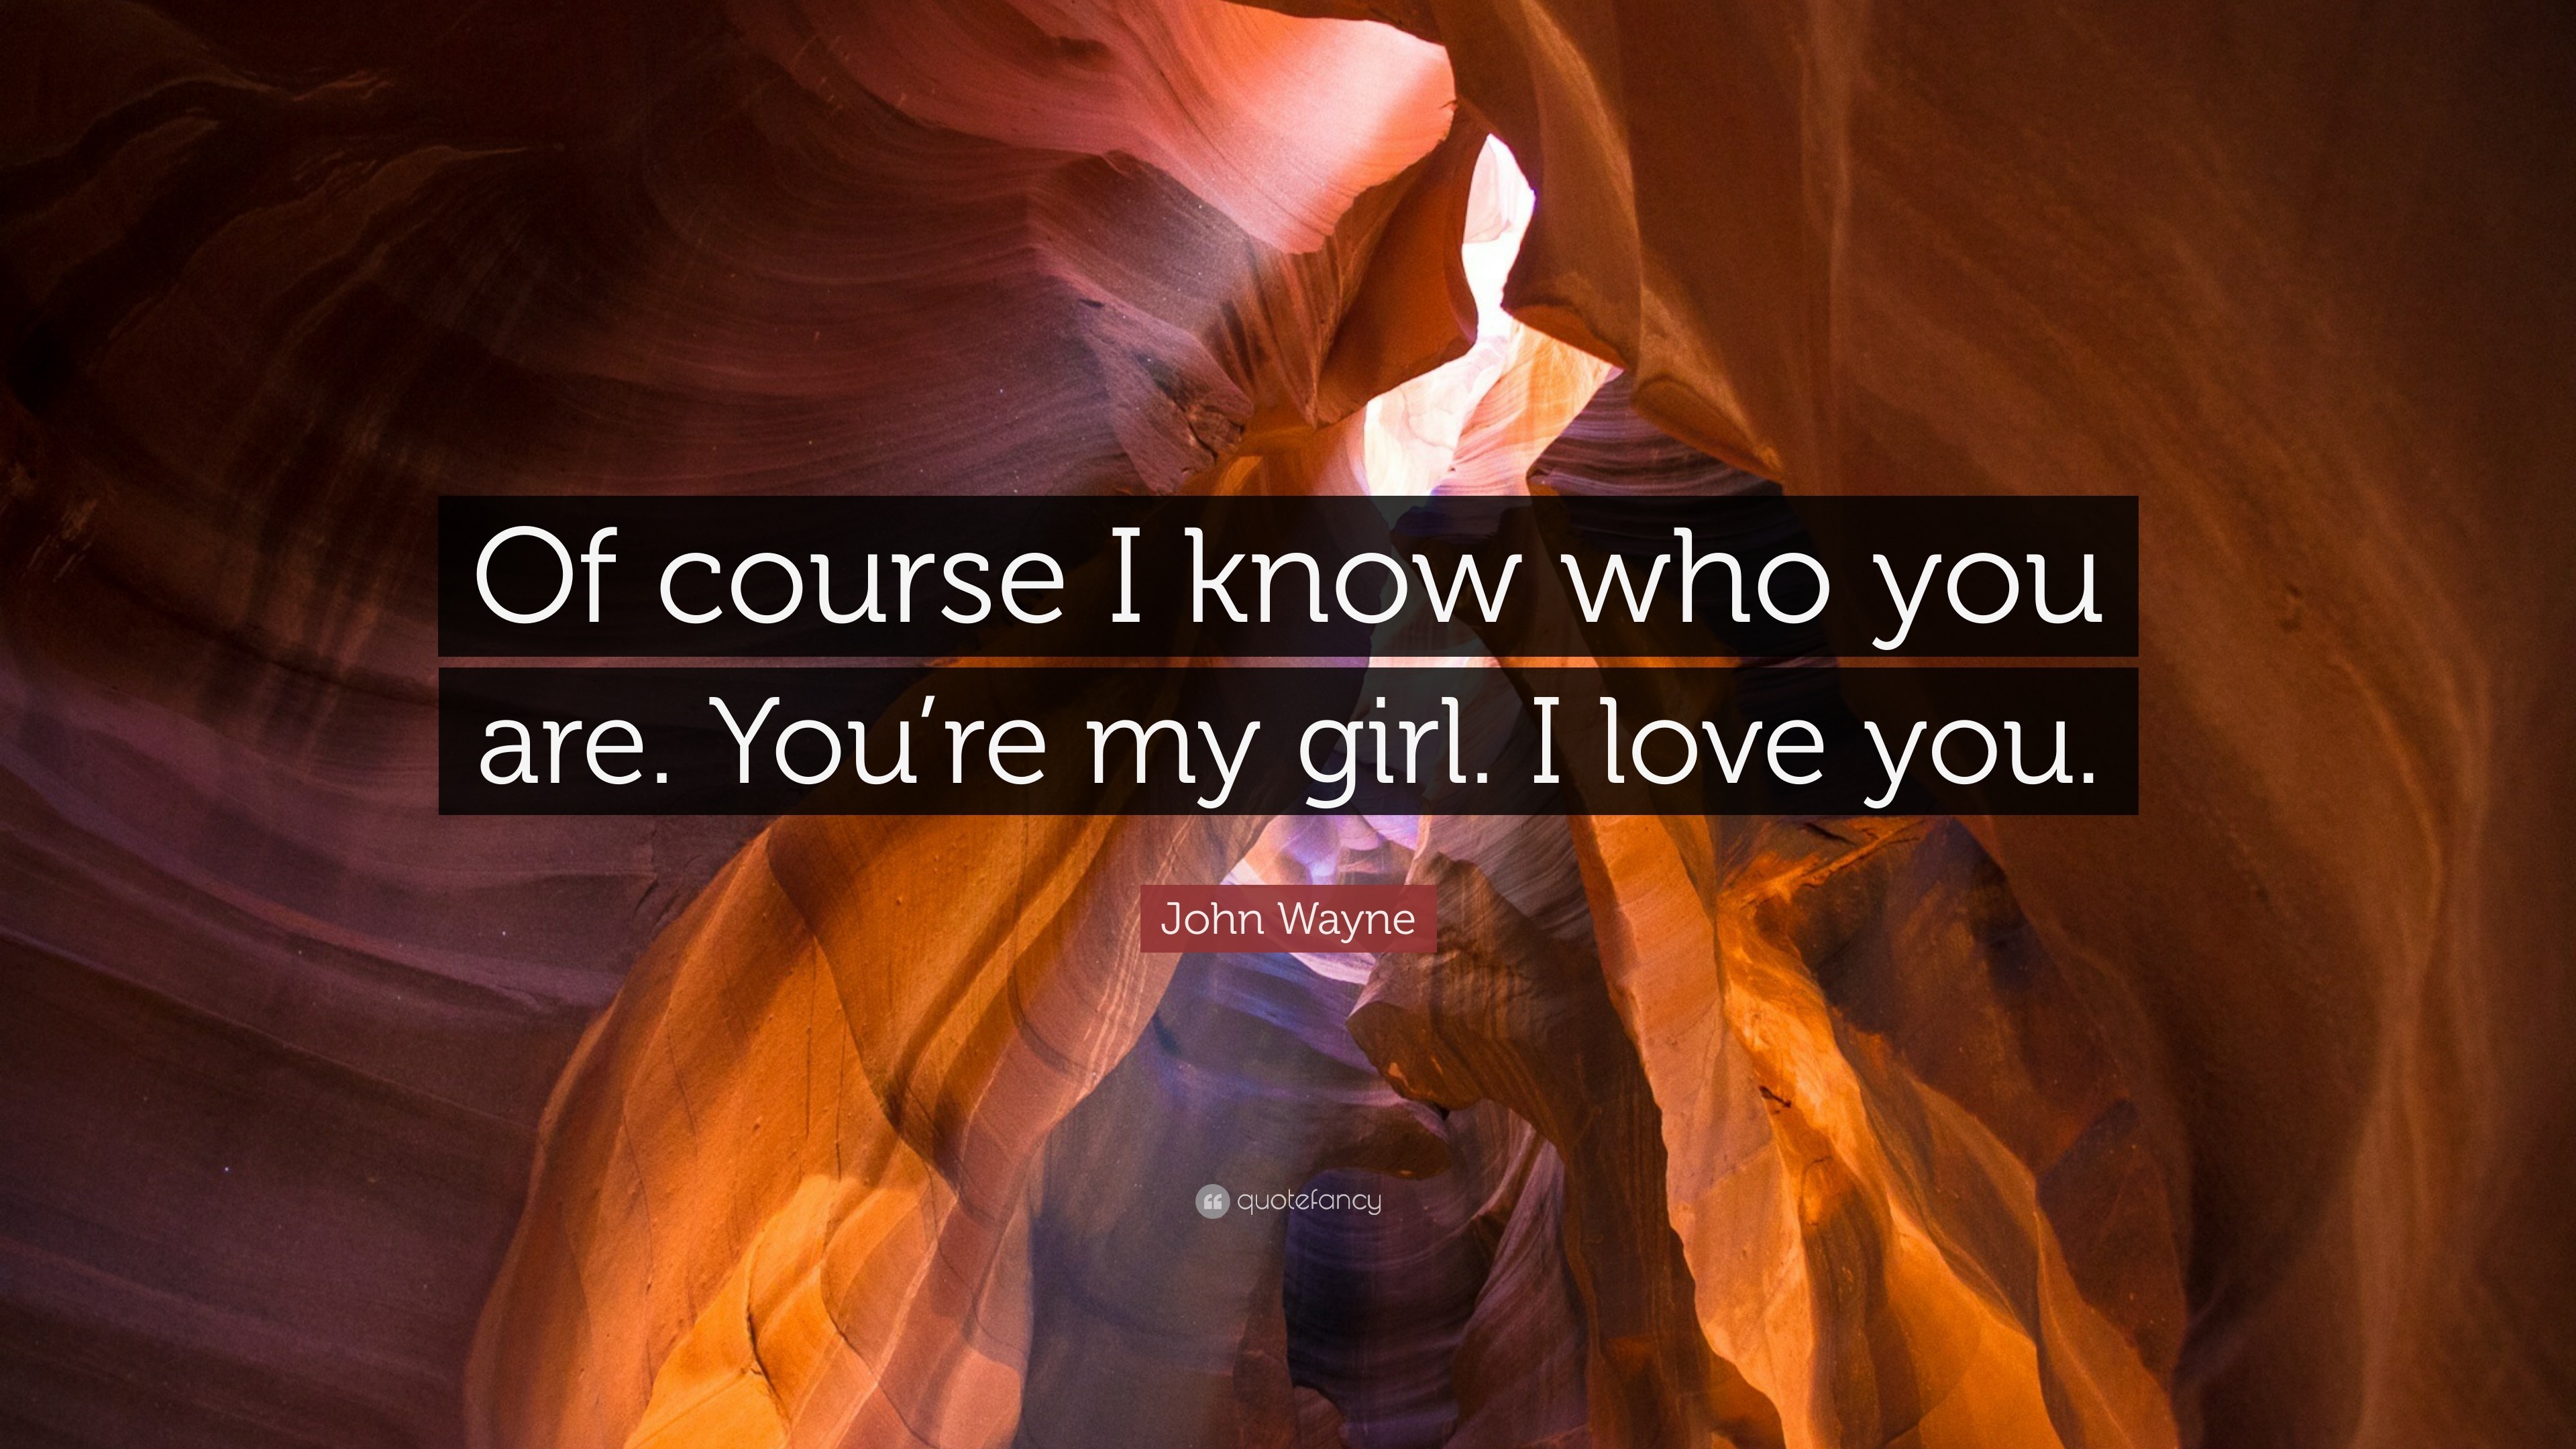 3840x2160 John Wayne Quote: “Of course I know who you are. You're